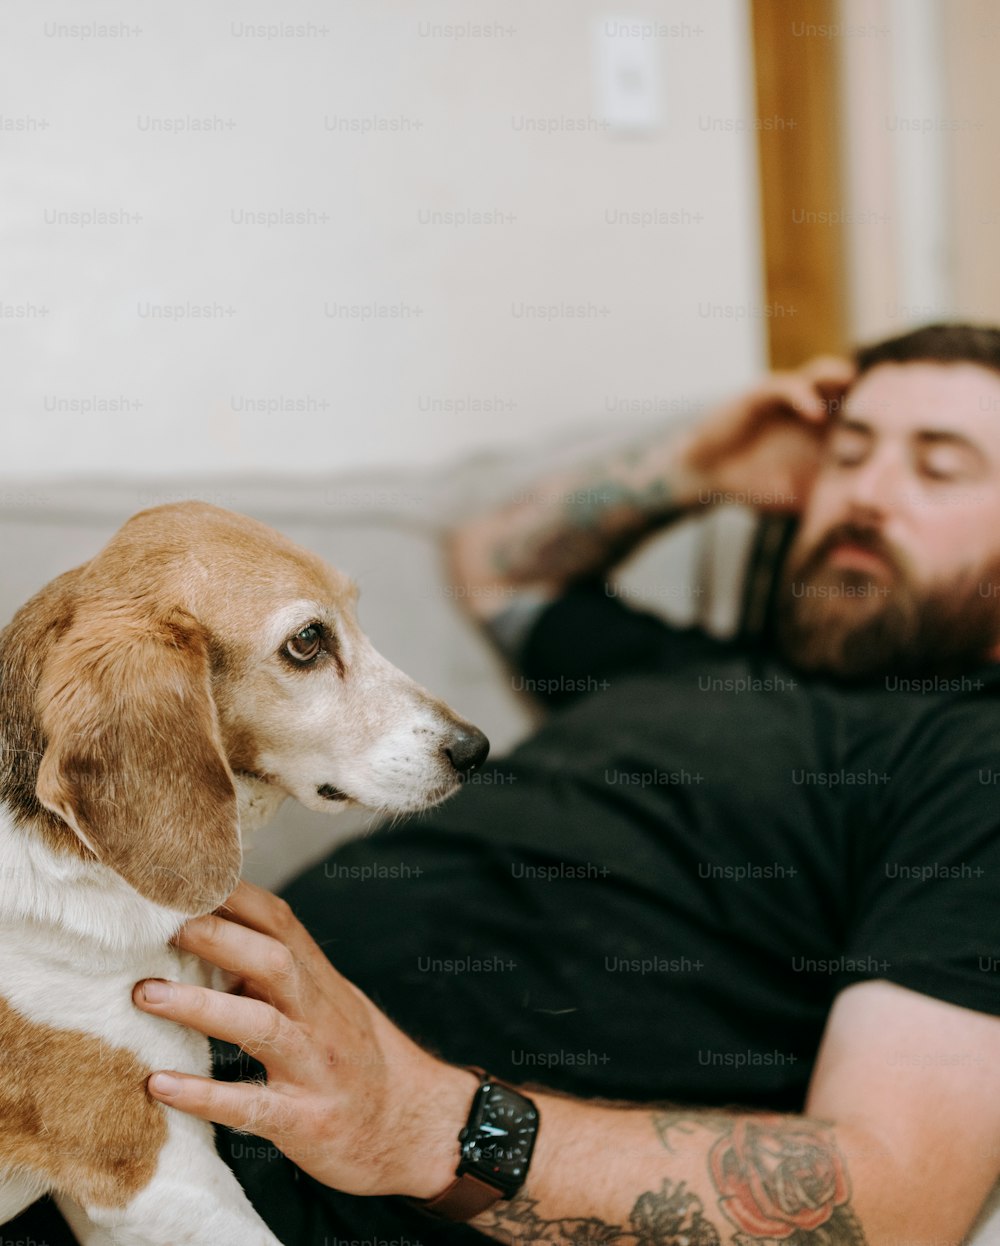 a man laying on a bed with a dog